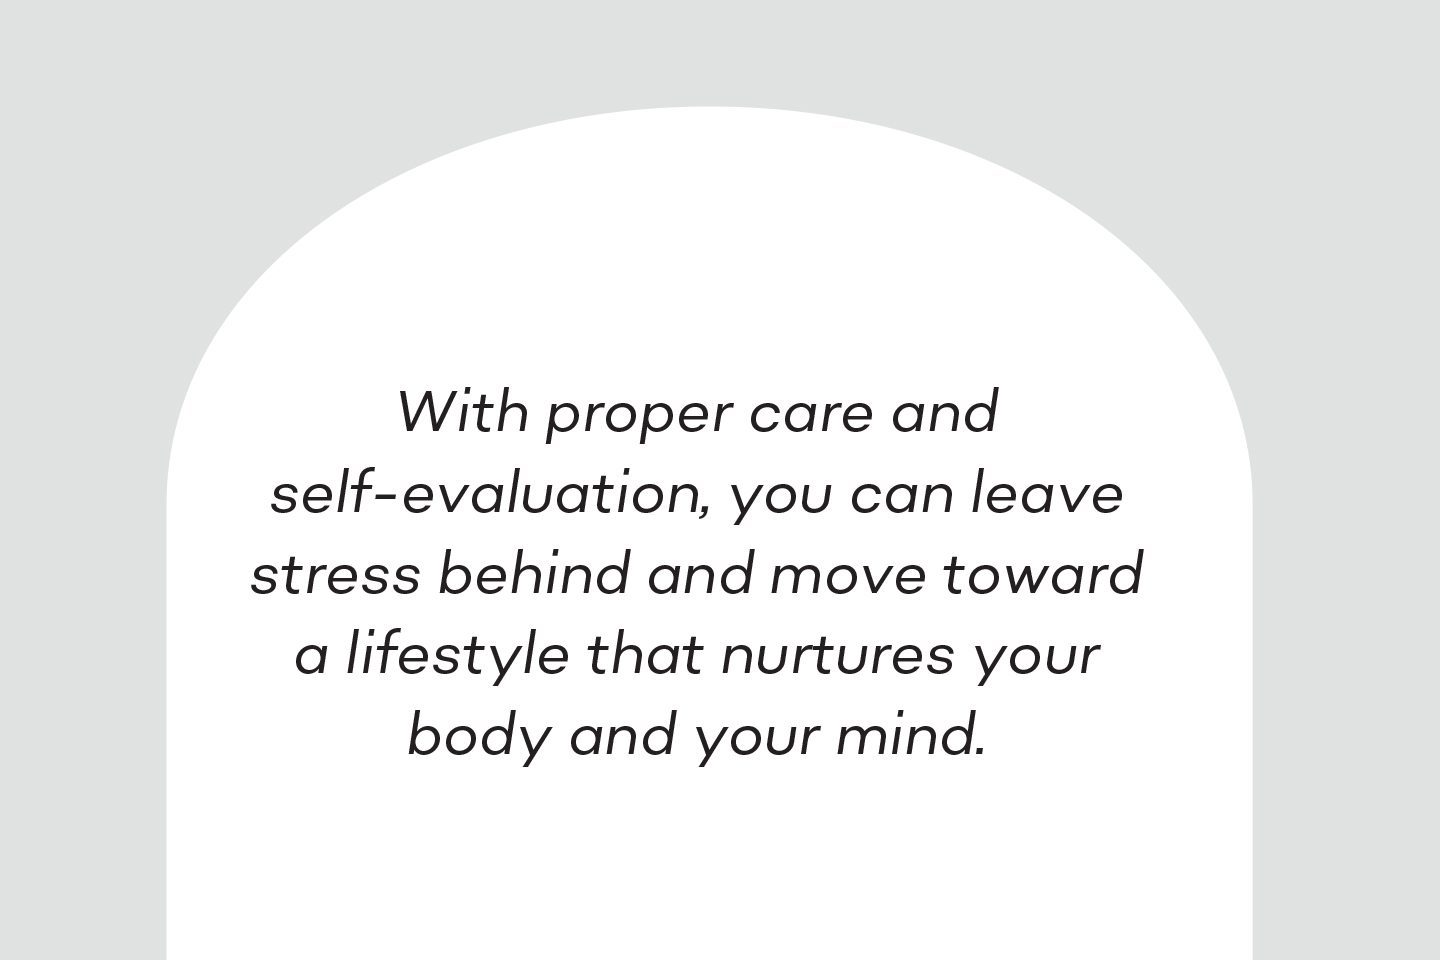 With proper care and self-evaluation, you can leave stress behind and move toward a lifestyle that nurtures your body and your mind.